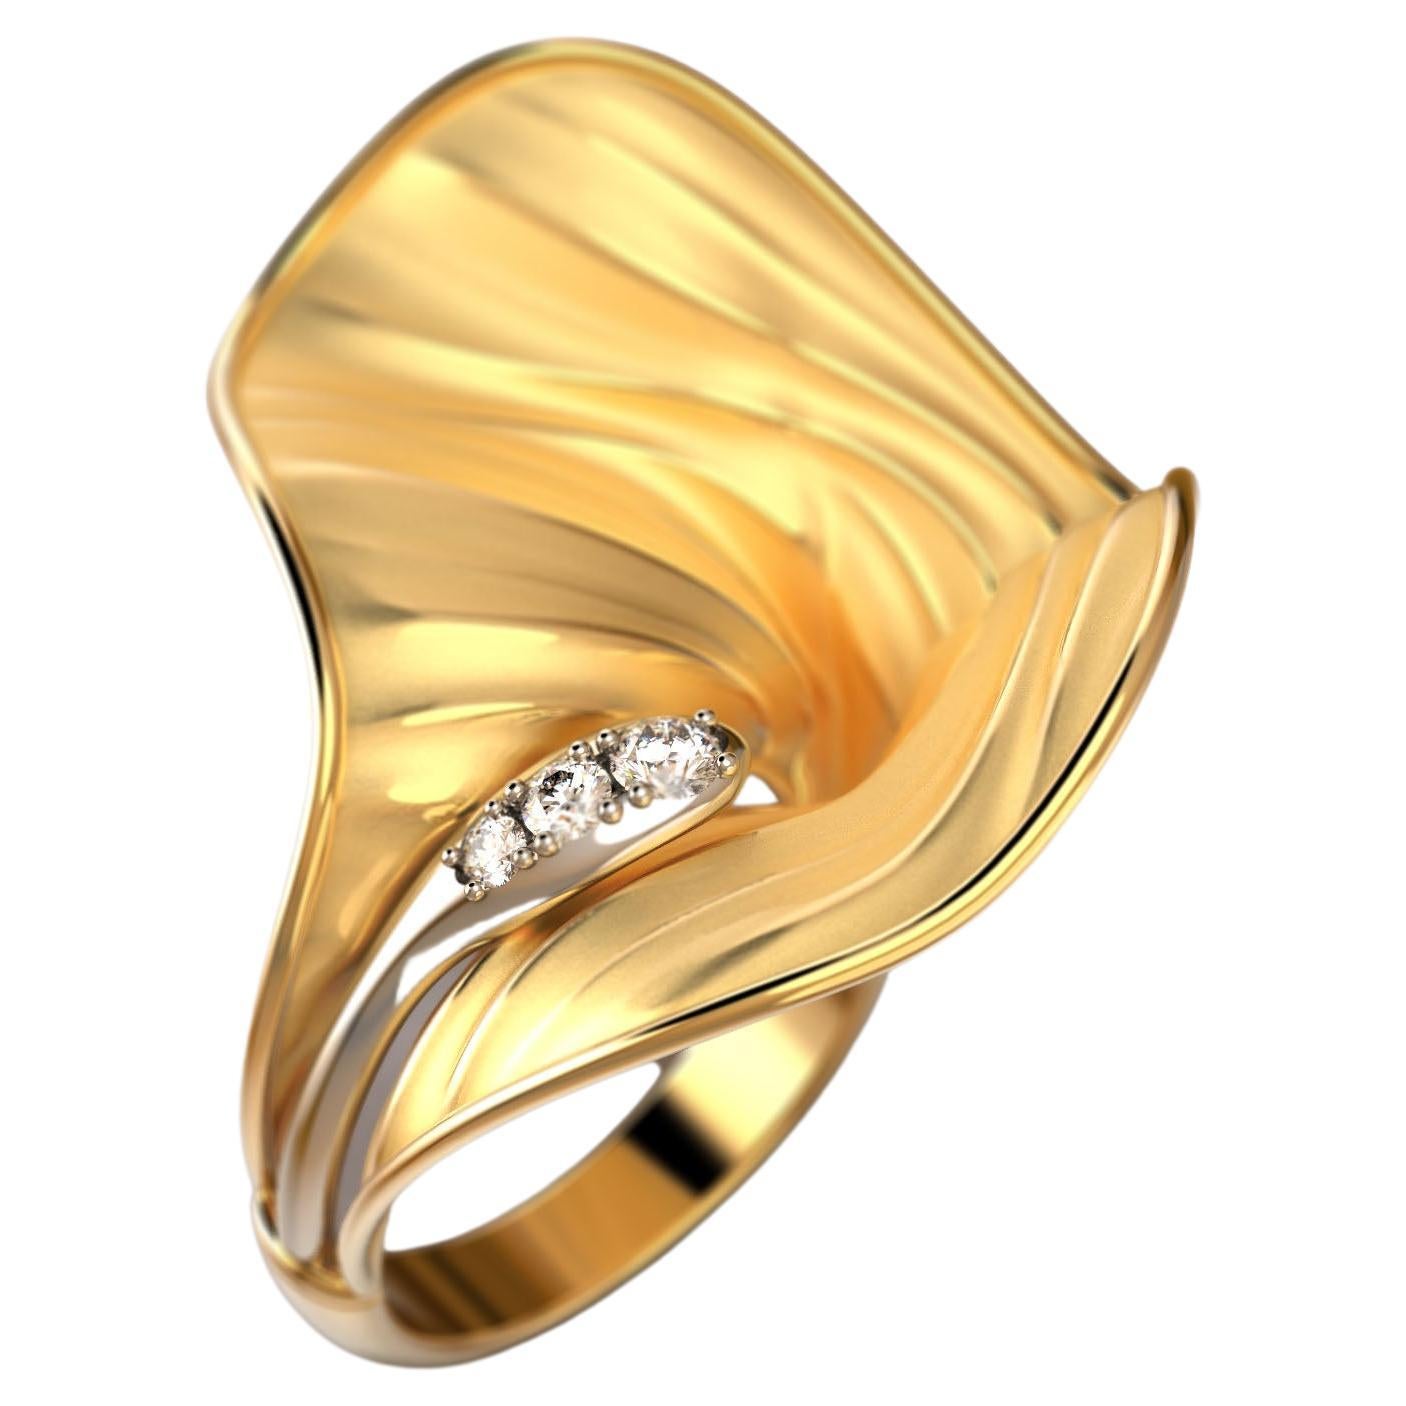 Oltremare Gioielli 18k Gold Ring with Diamonds, Made in Italy Diamond Ring